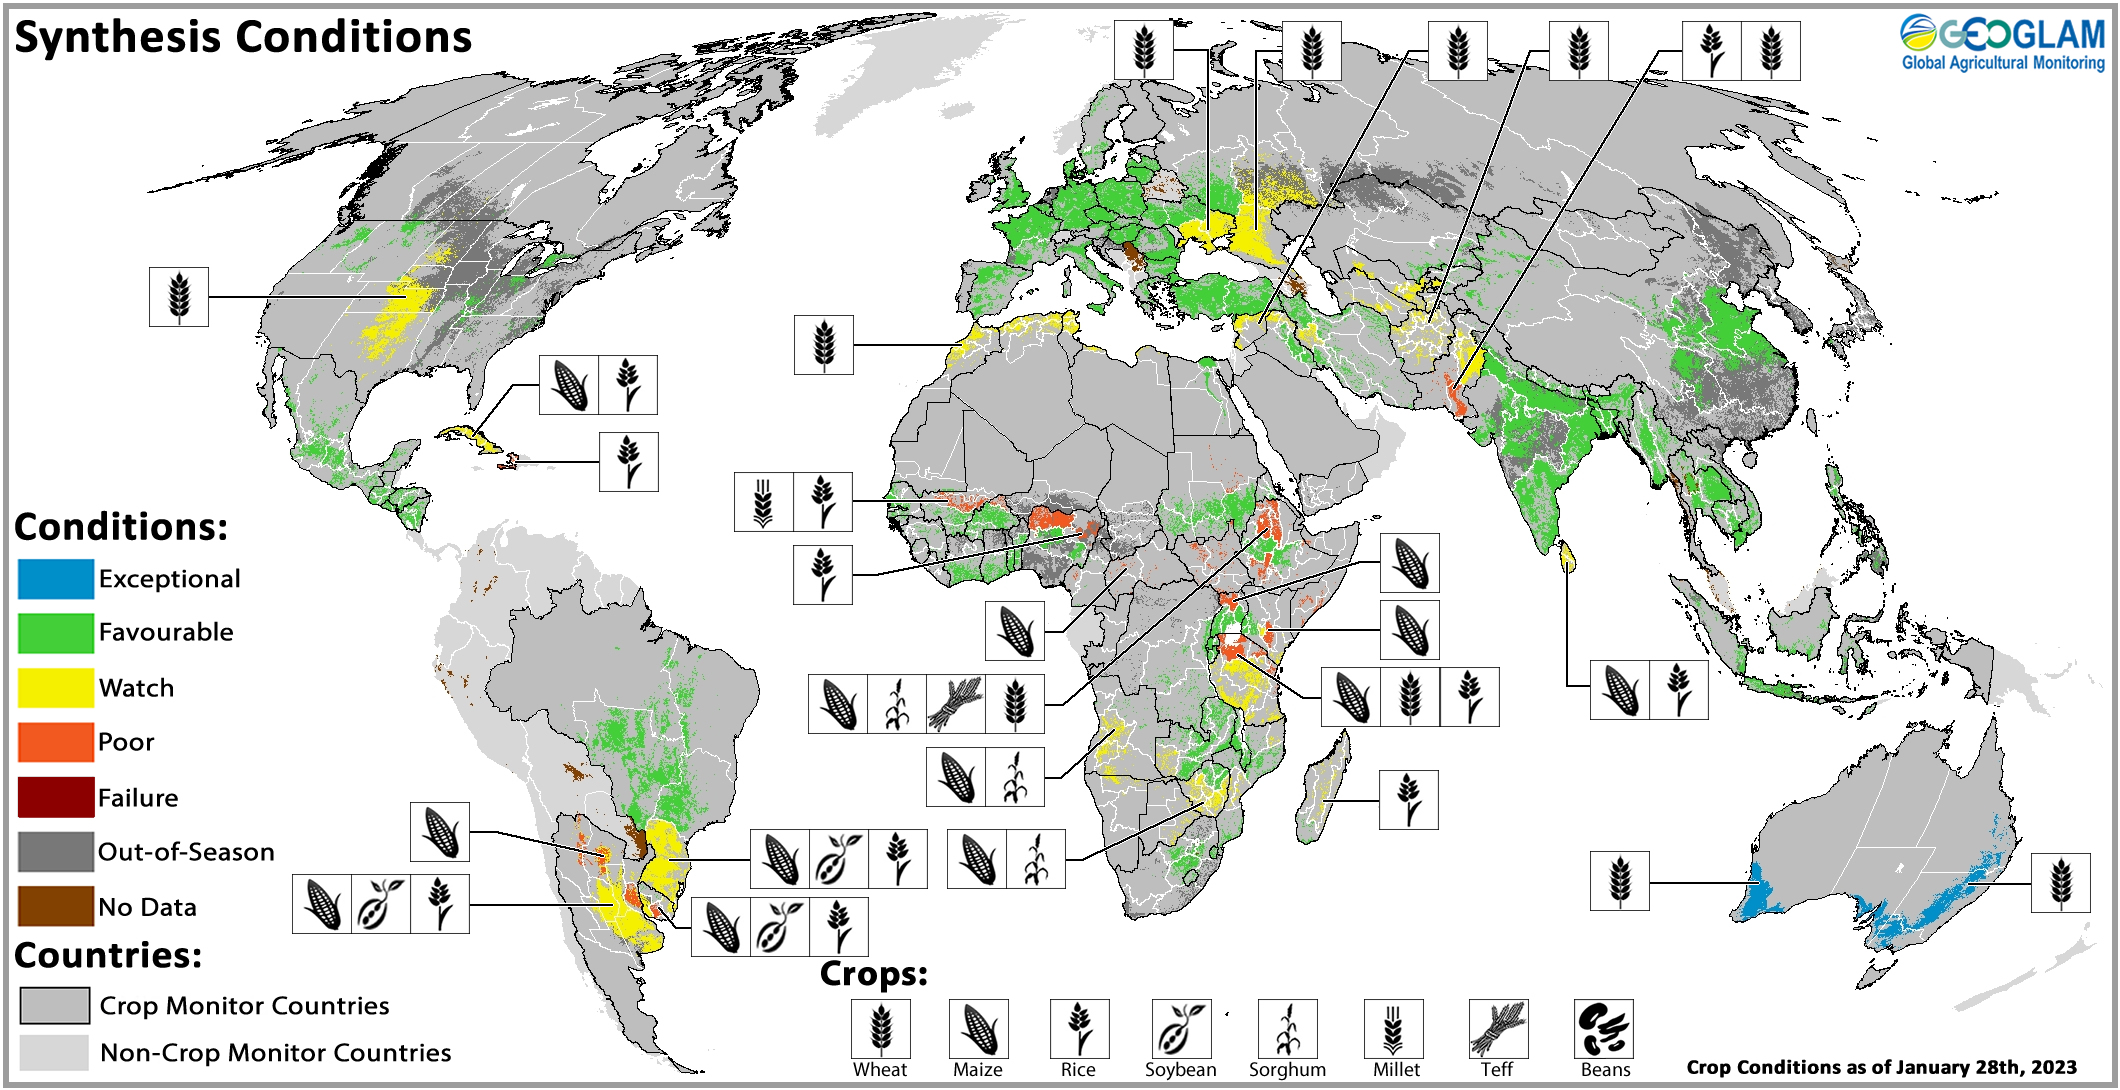  GLOBAL CROP MONITOR_202301_Conditions as of January 28th